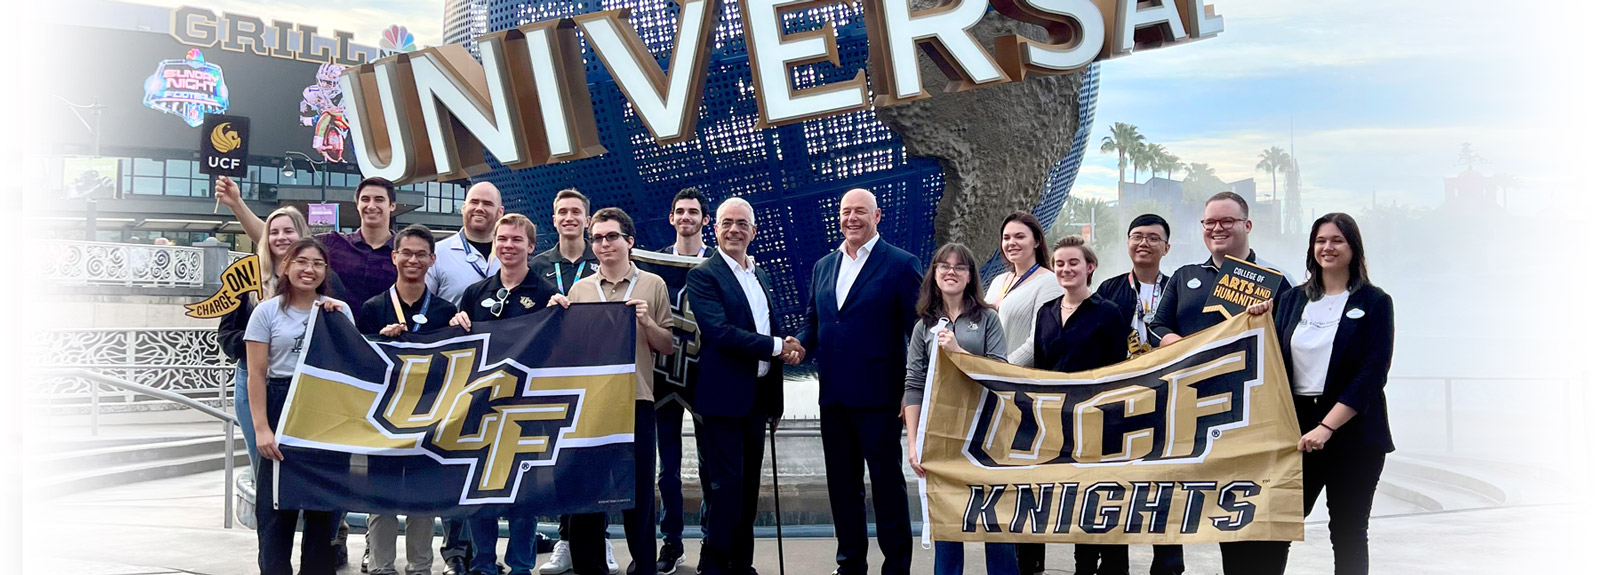 Directors and Universal Creative interns pose with UCF flags in front of Universal Studios Orlando